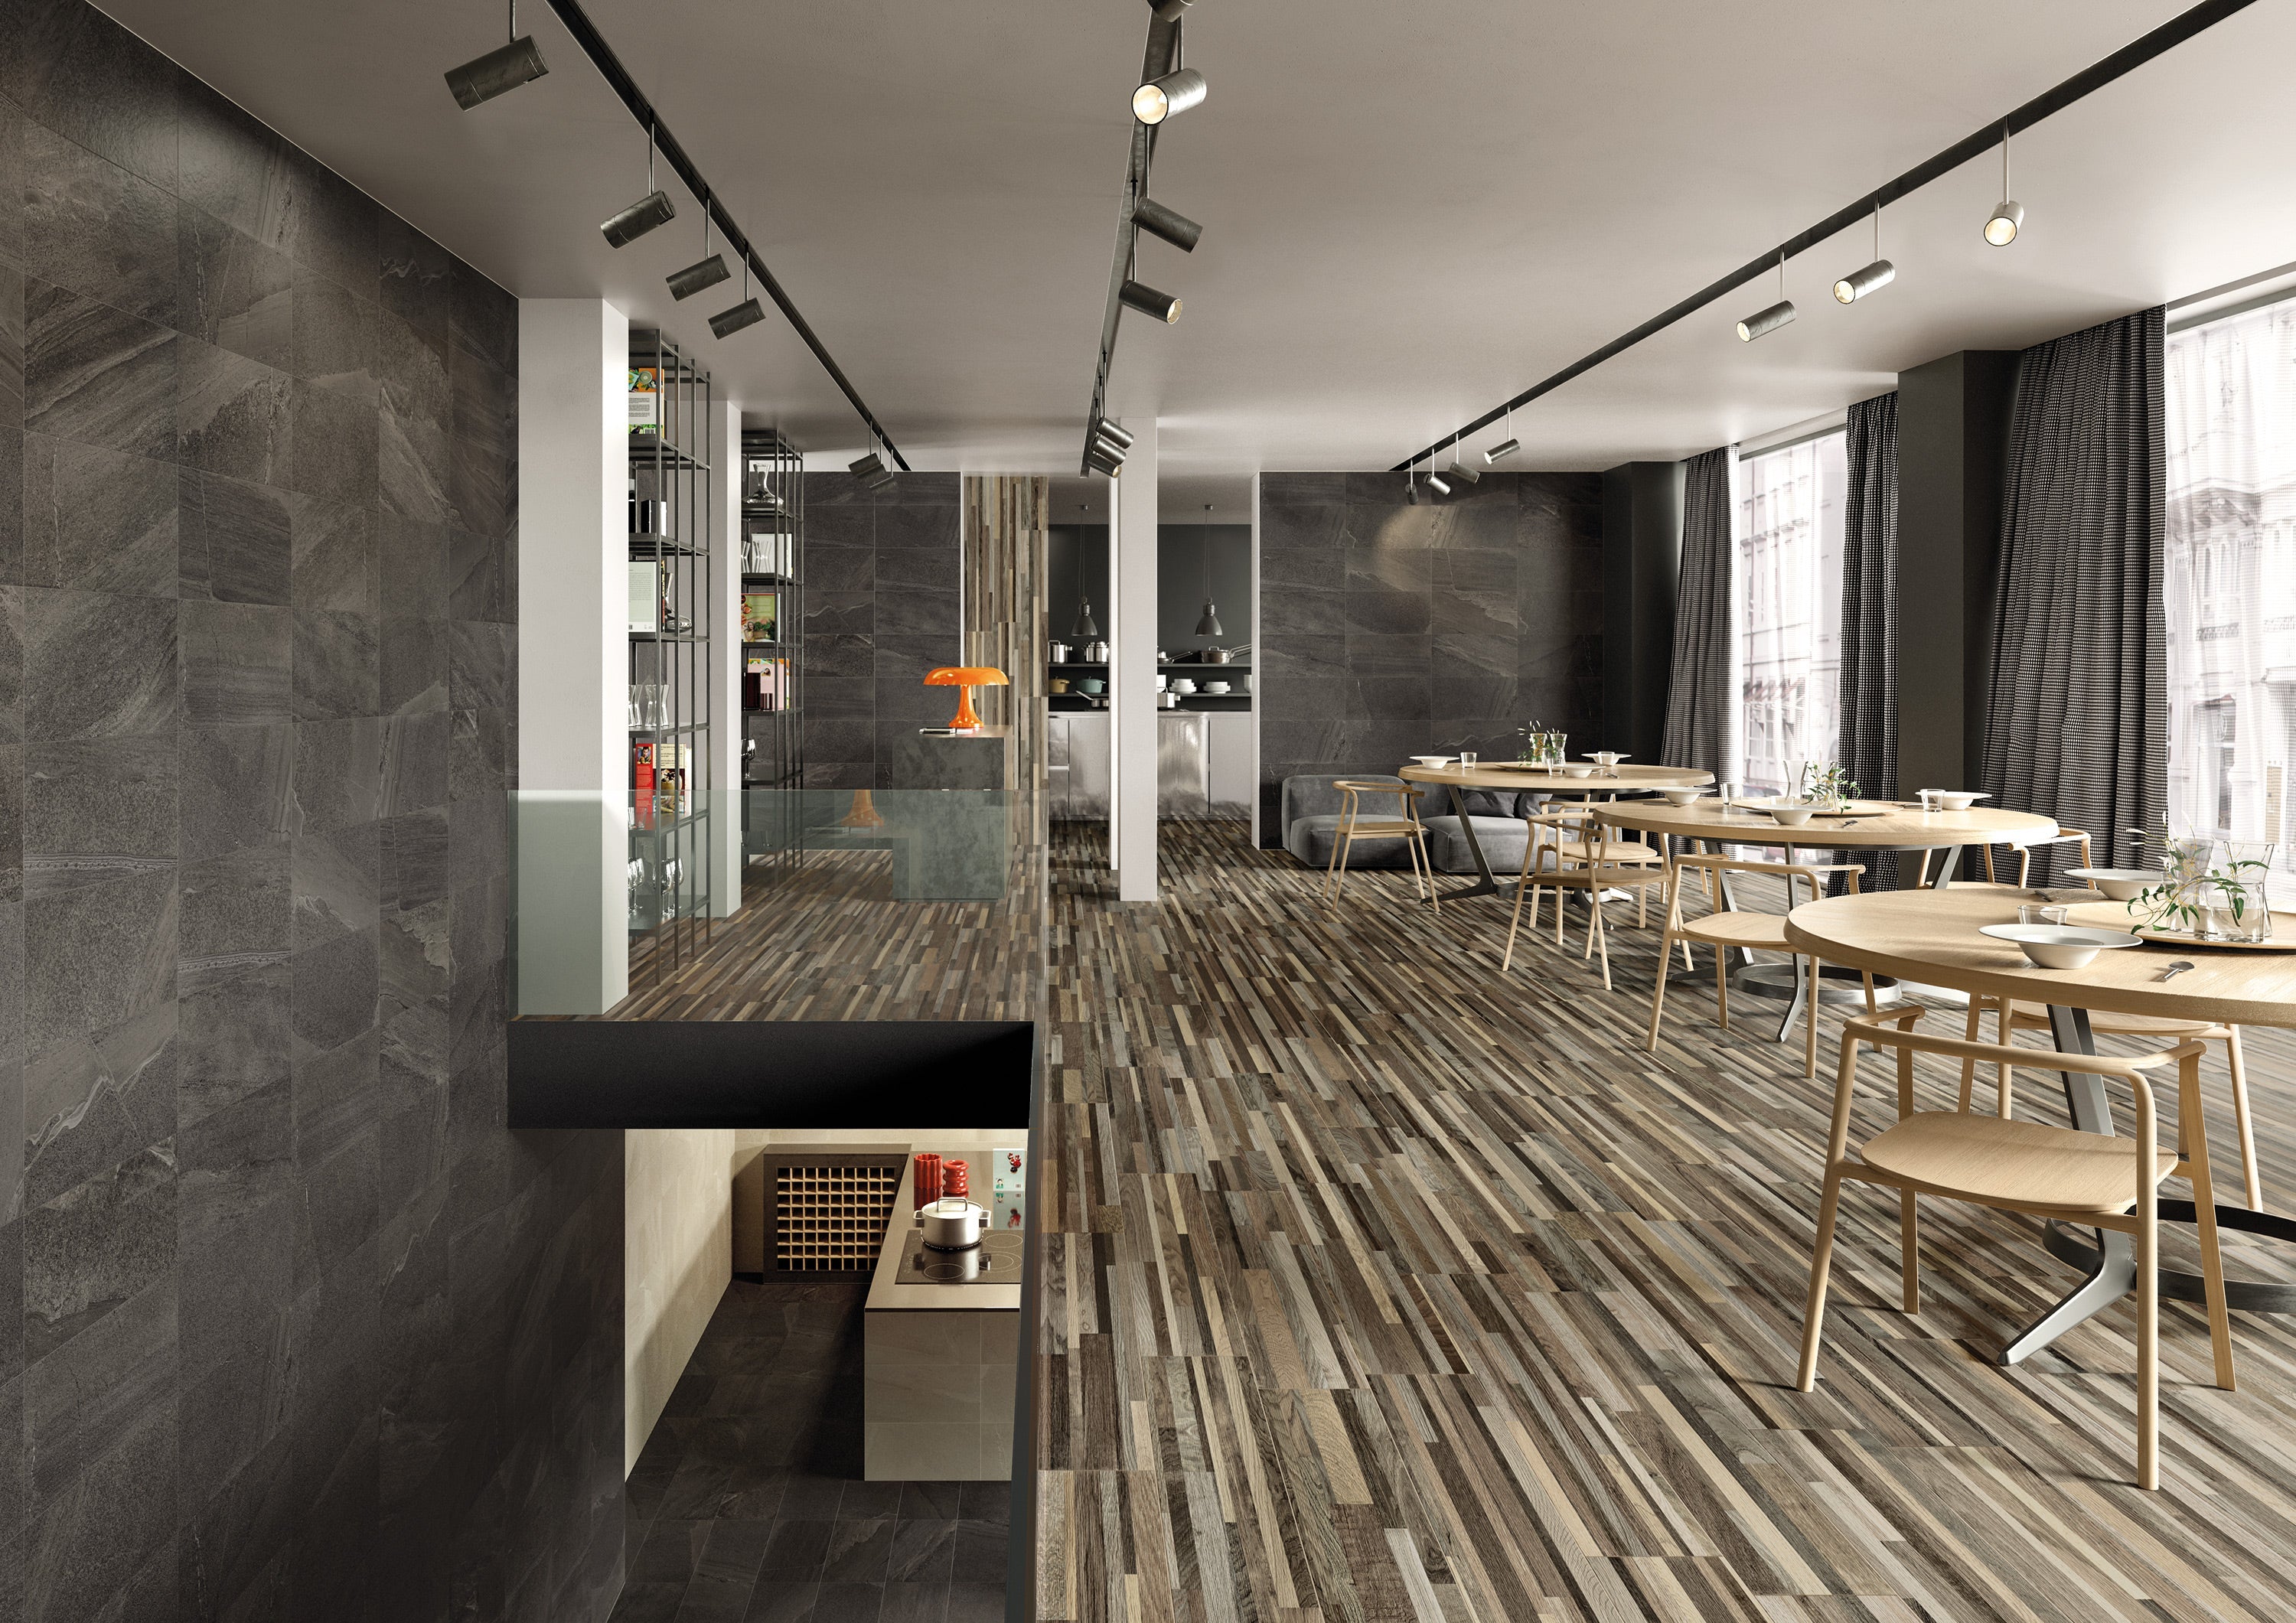 Porcelain tile collection from Surface Group featuring natural stone look in a modern commercial interior with mixed patterns and textures.